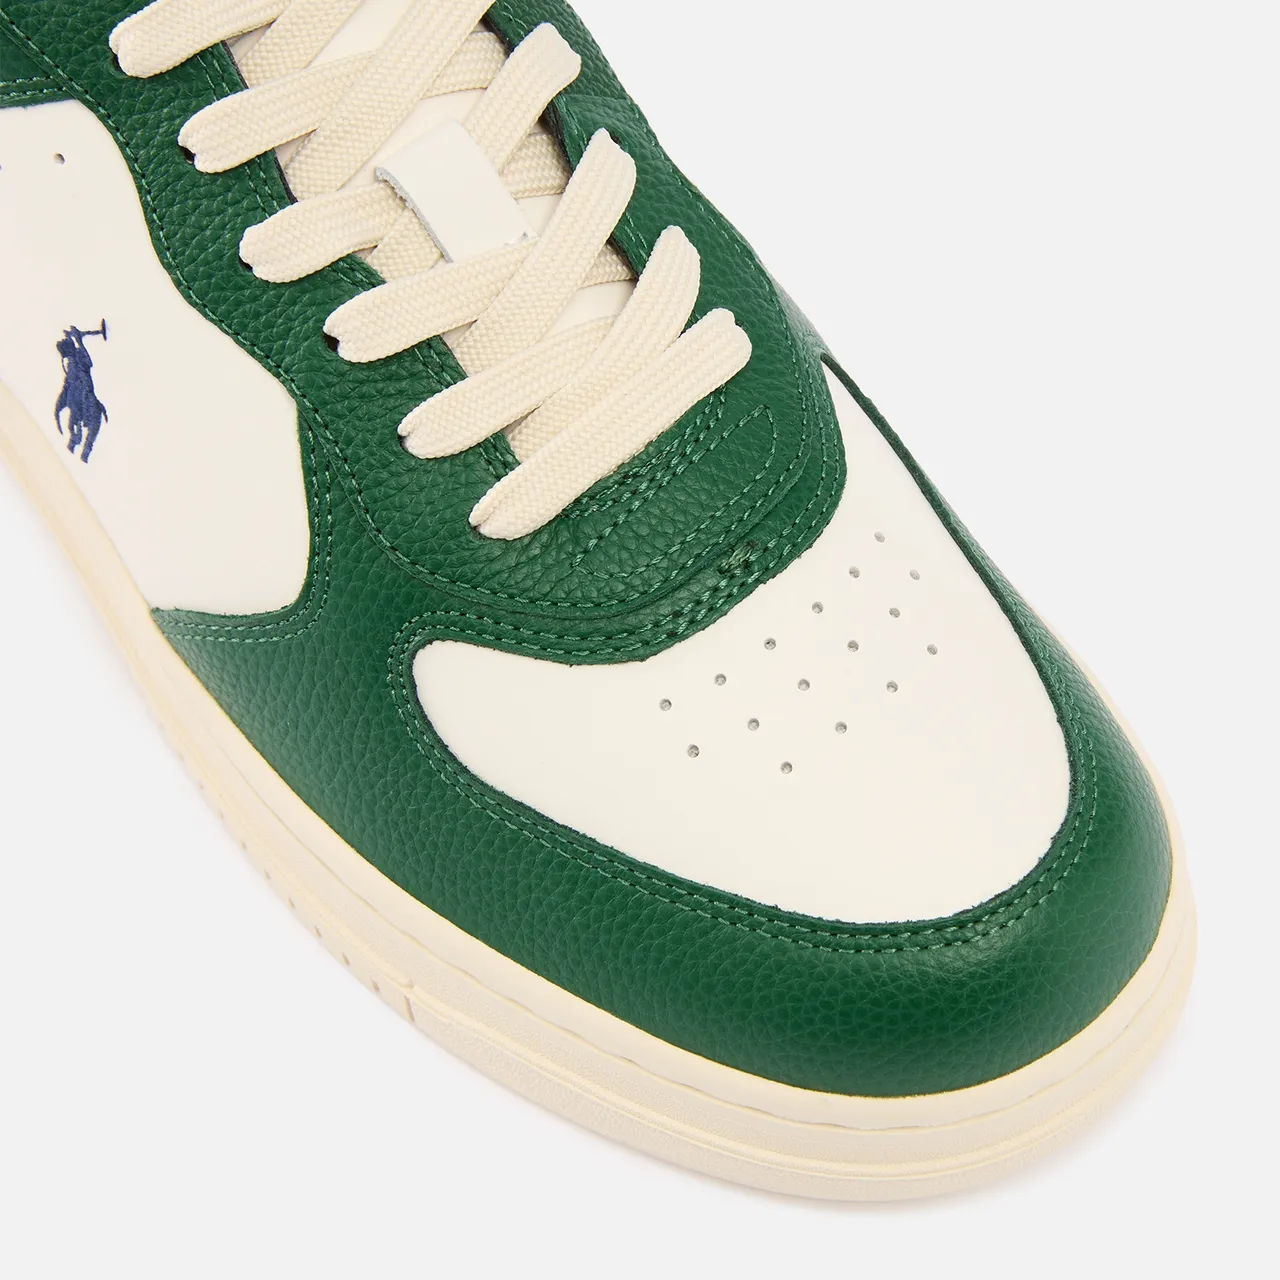 Polo Ralph Lauren Men's Master Leather Court Trainers